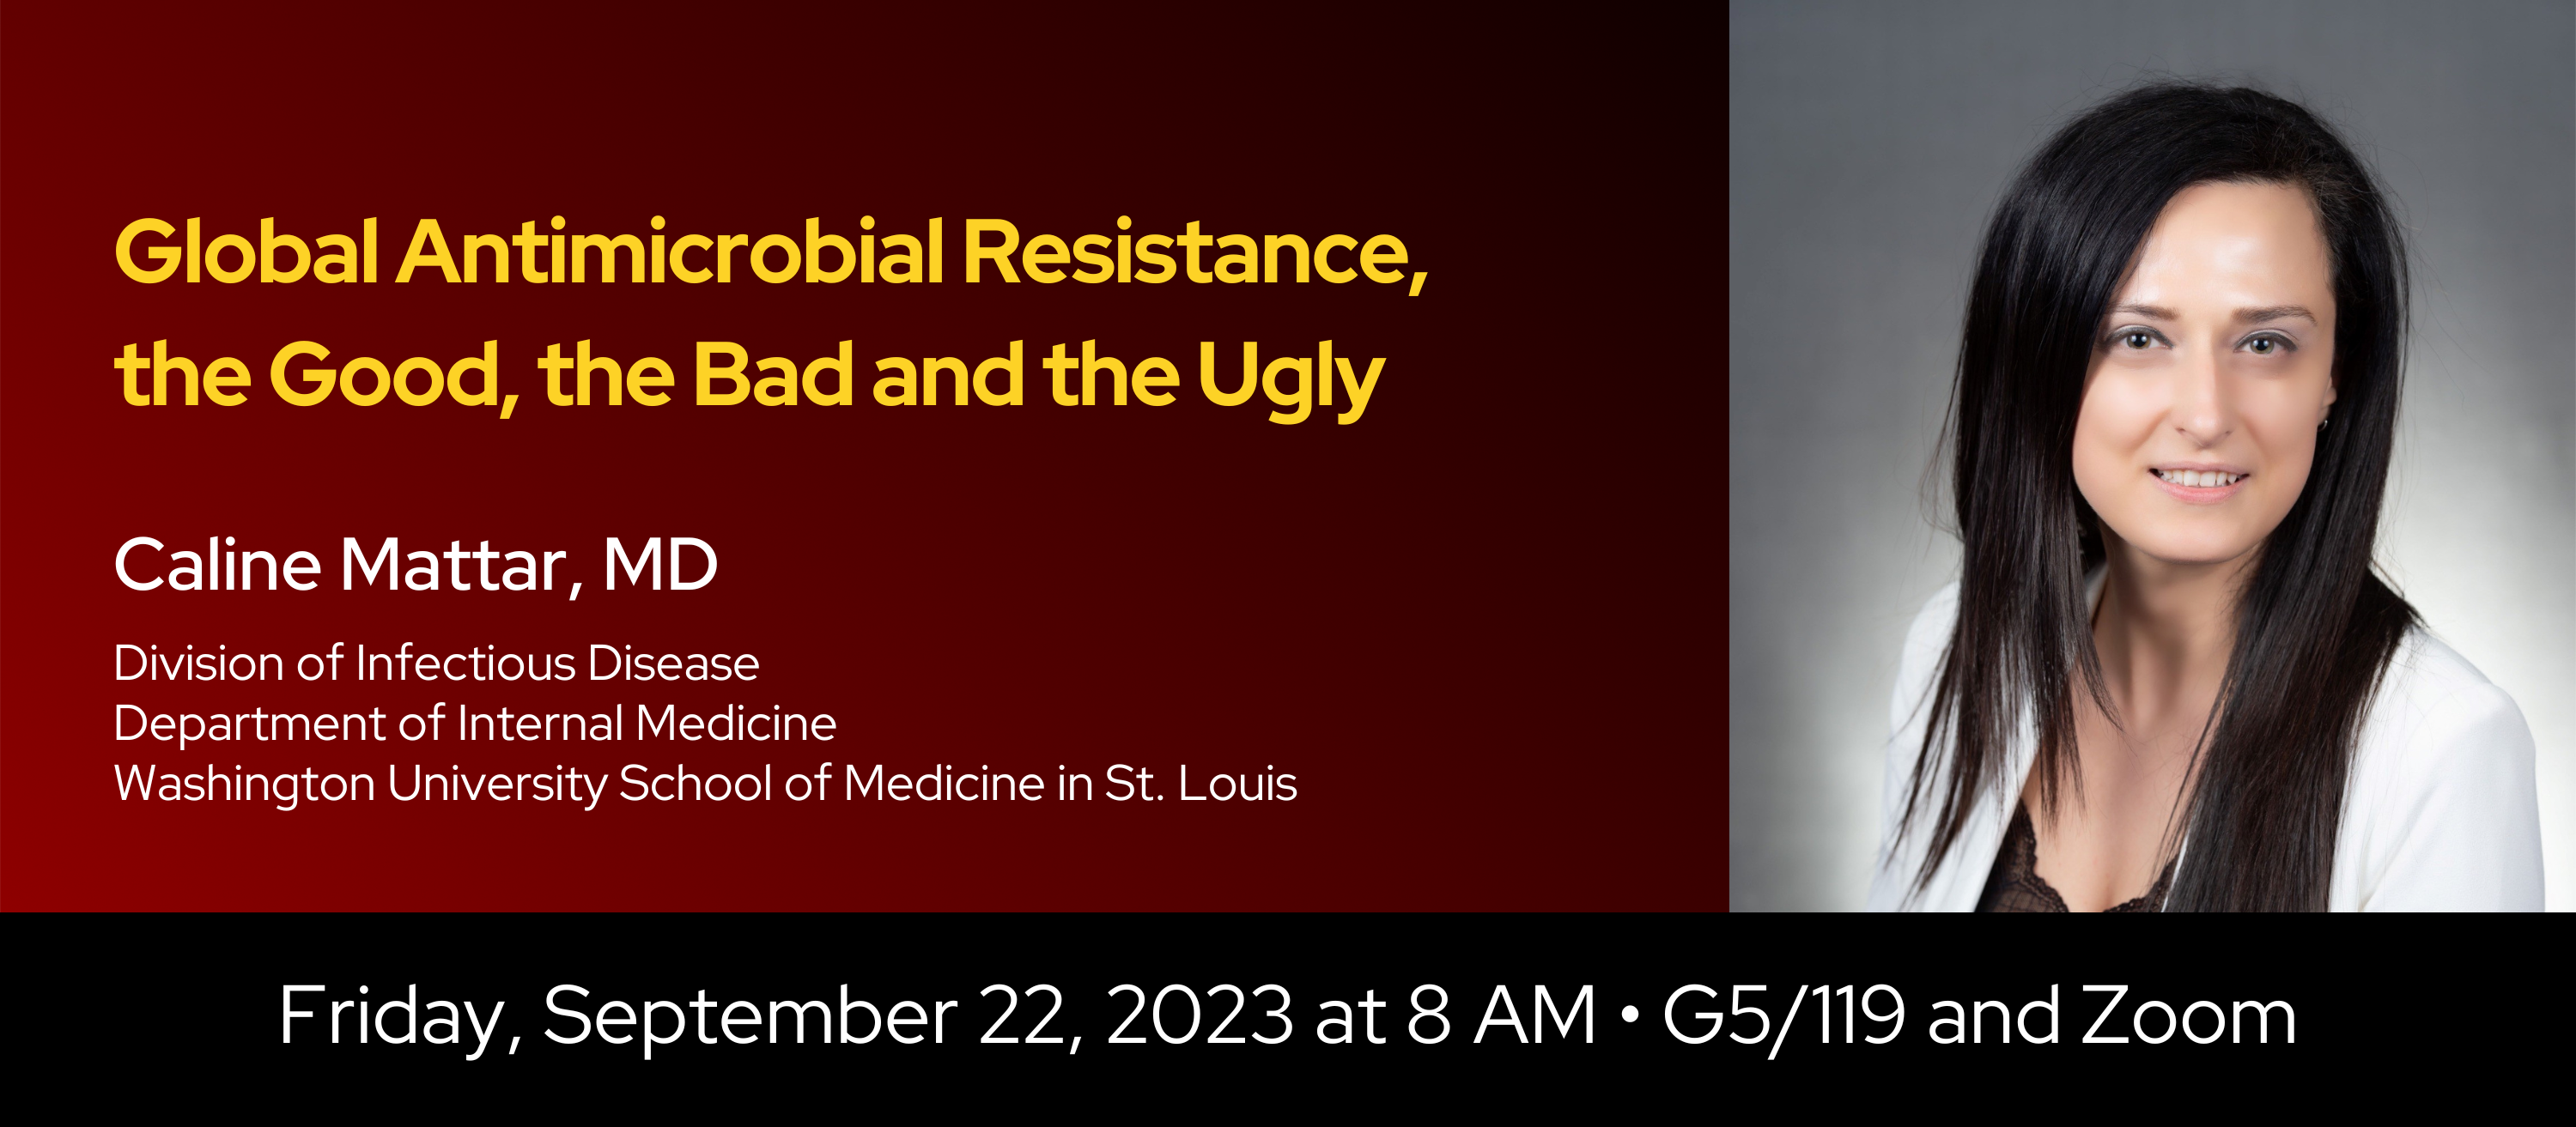 Title: Global Antimicrobial Resistance, the Good, the Bad and the Ugly